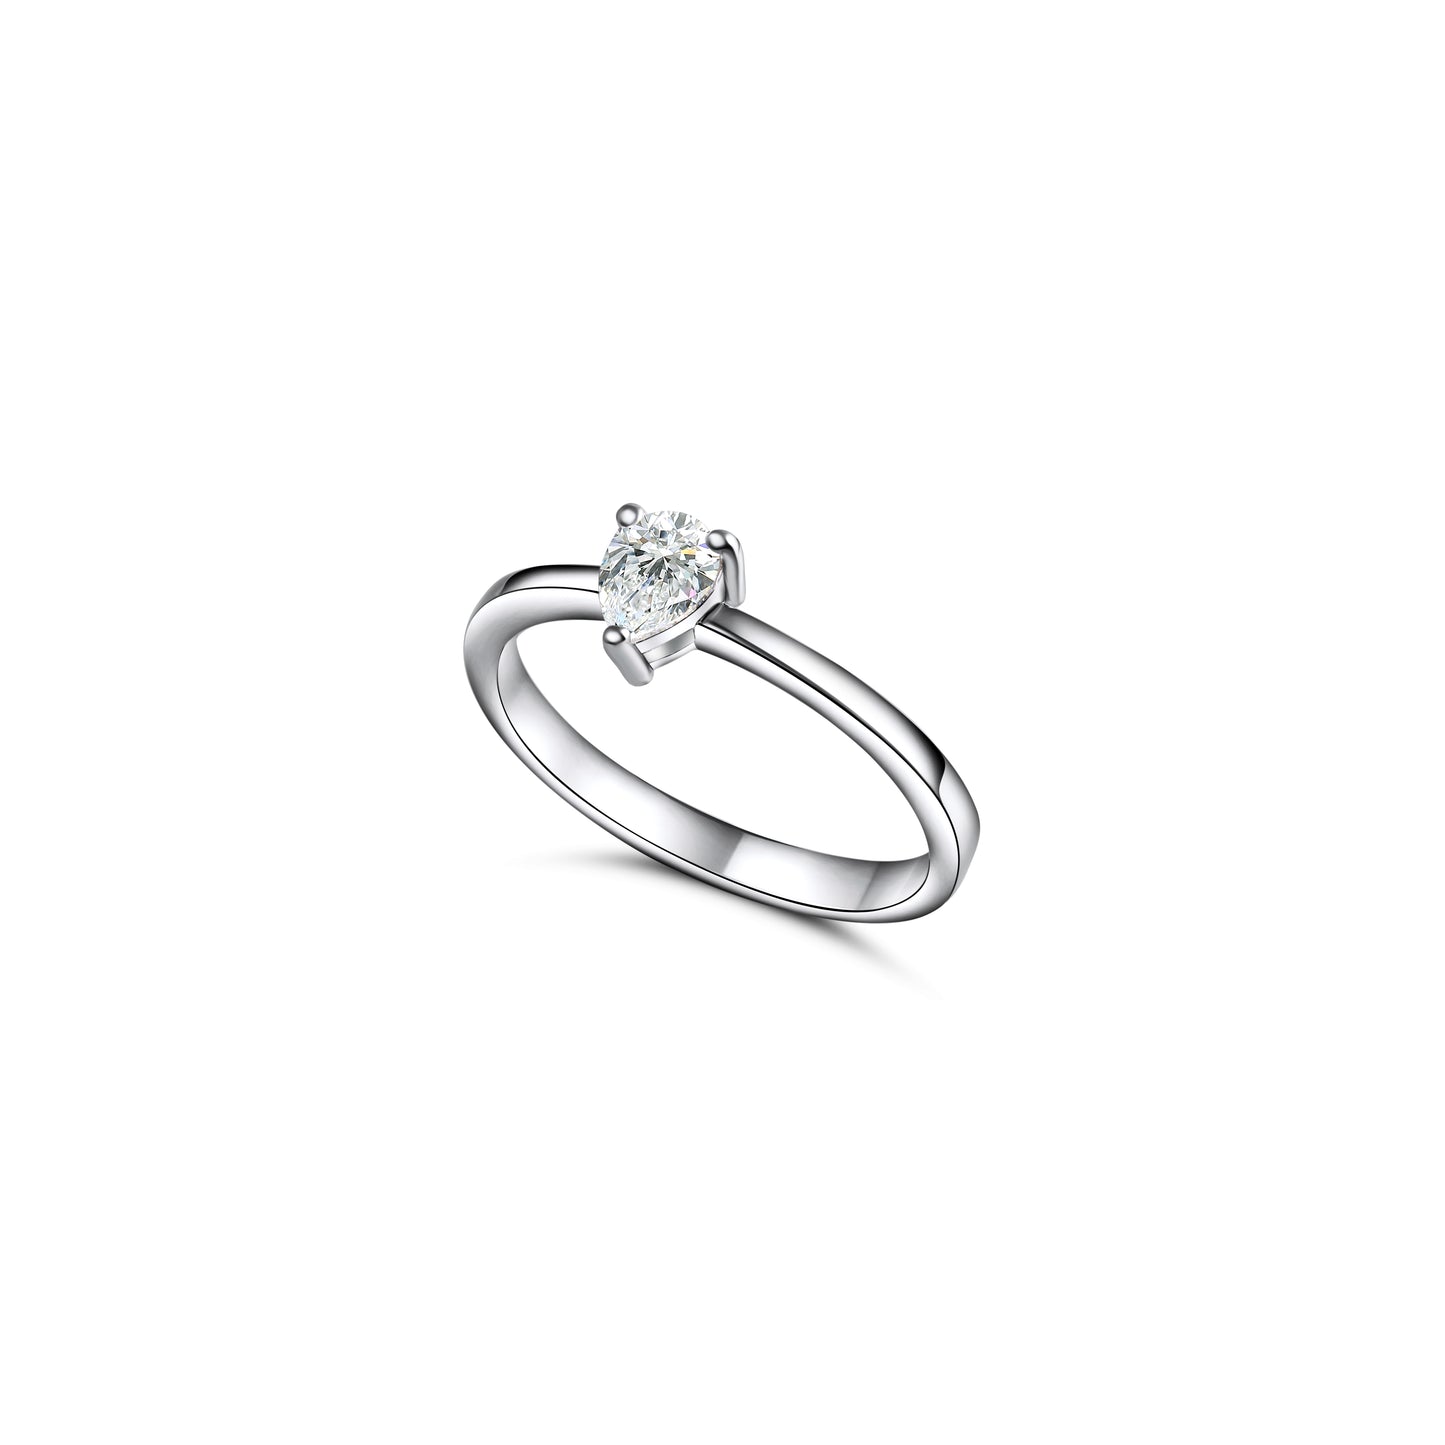 SPARKLING FANCY SOLITAIRE WHITE GOLD RING